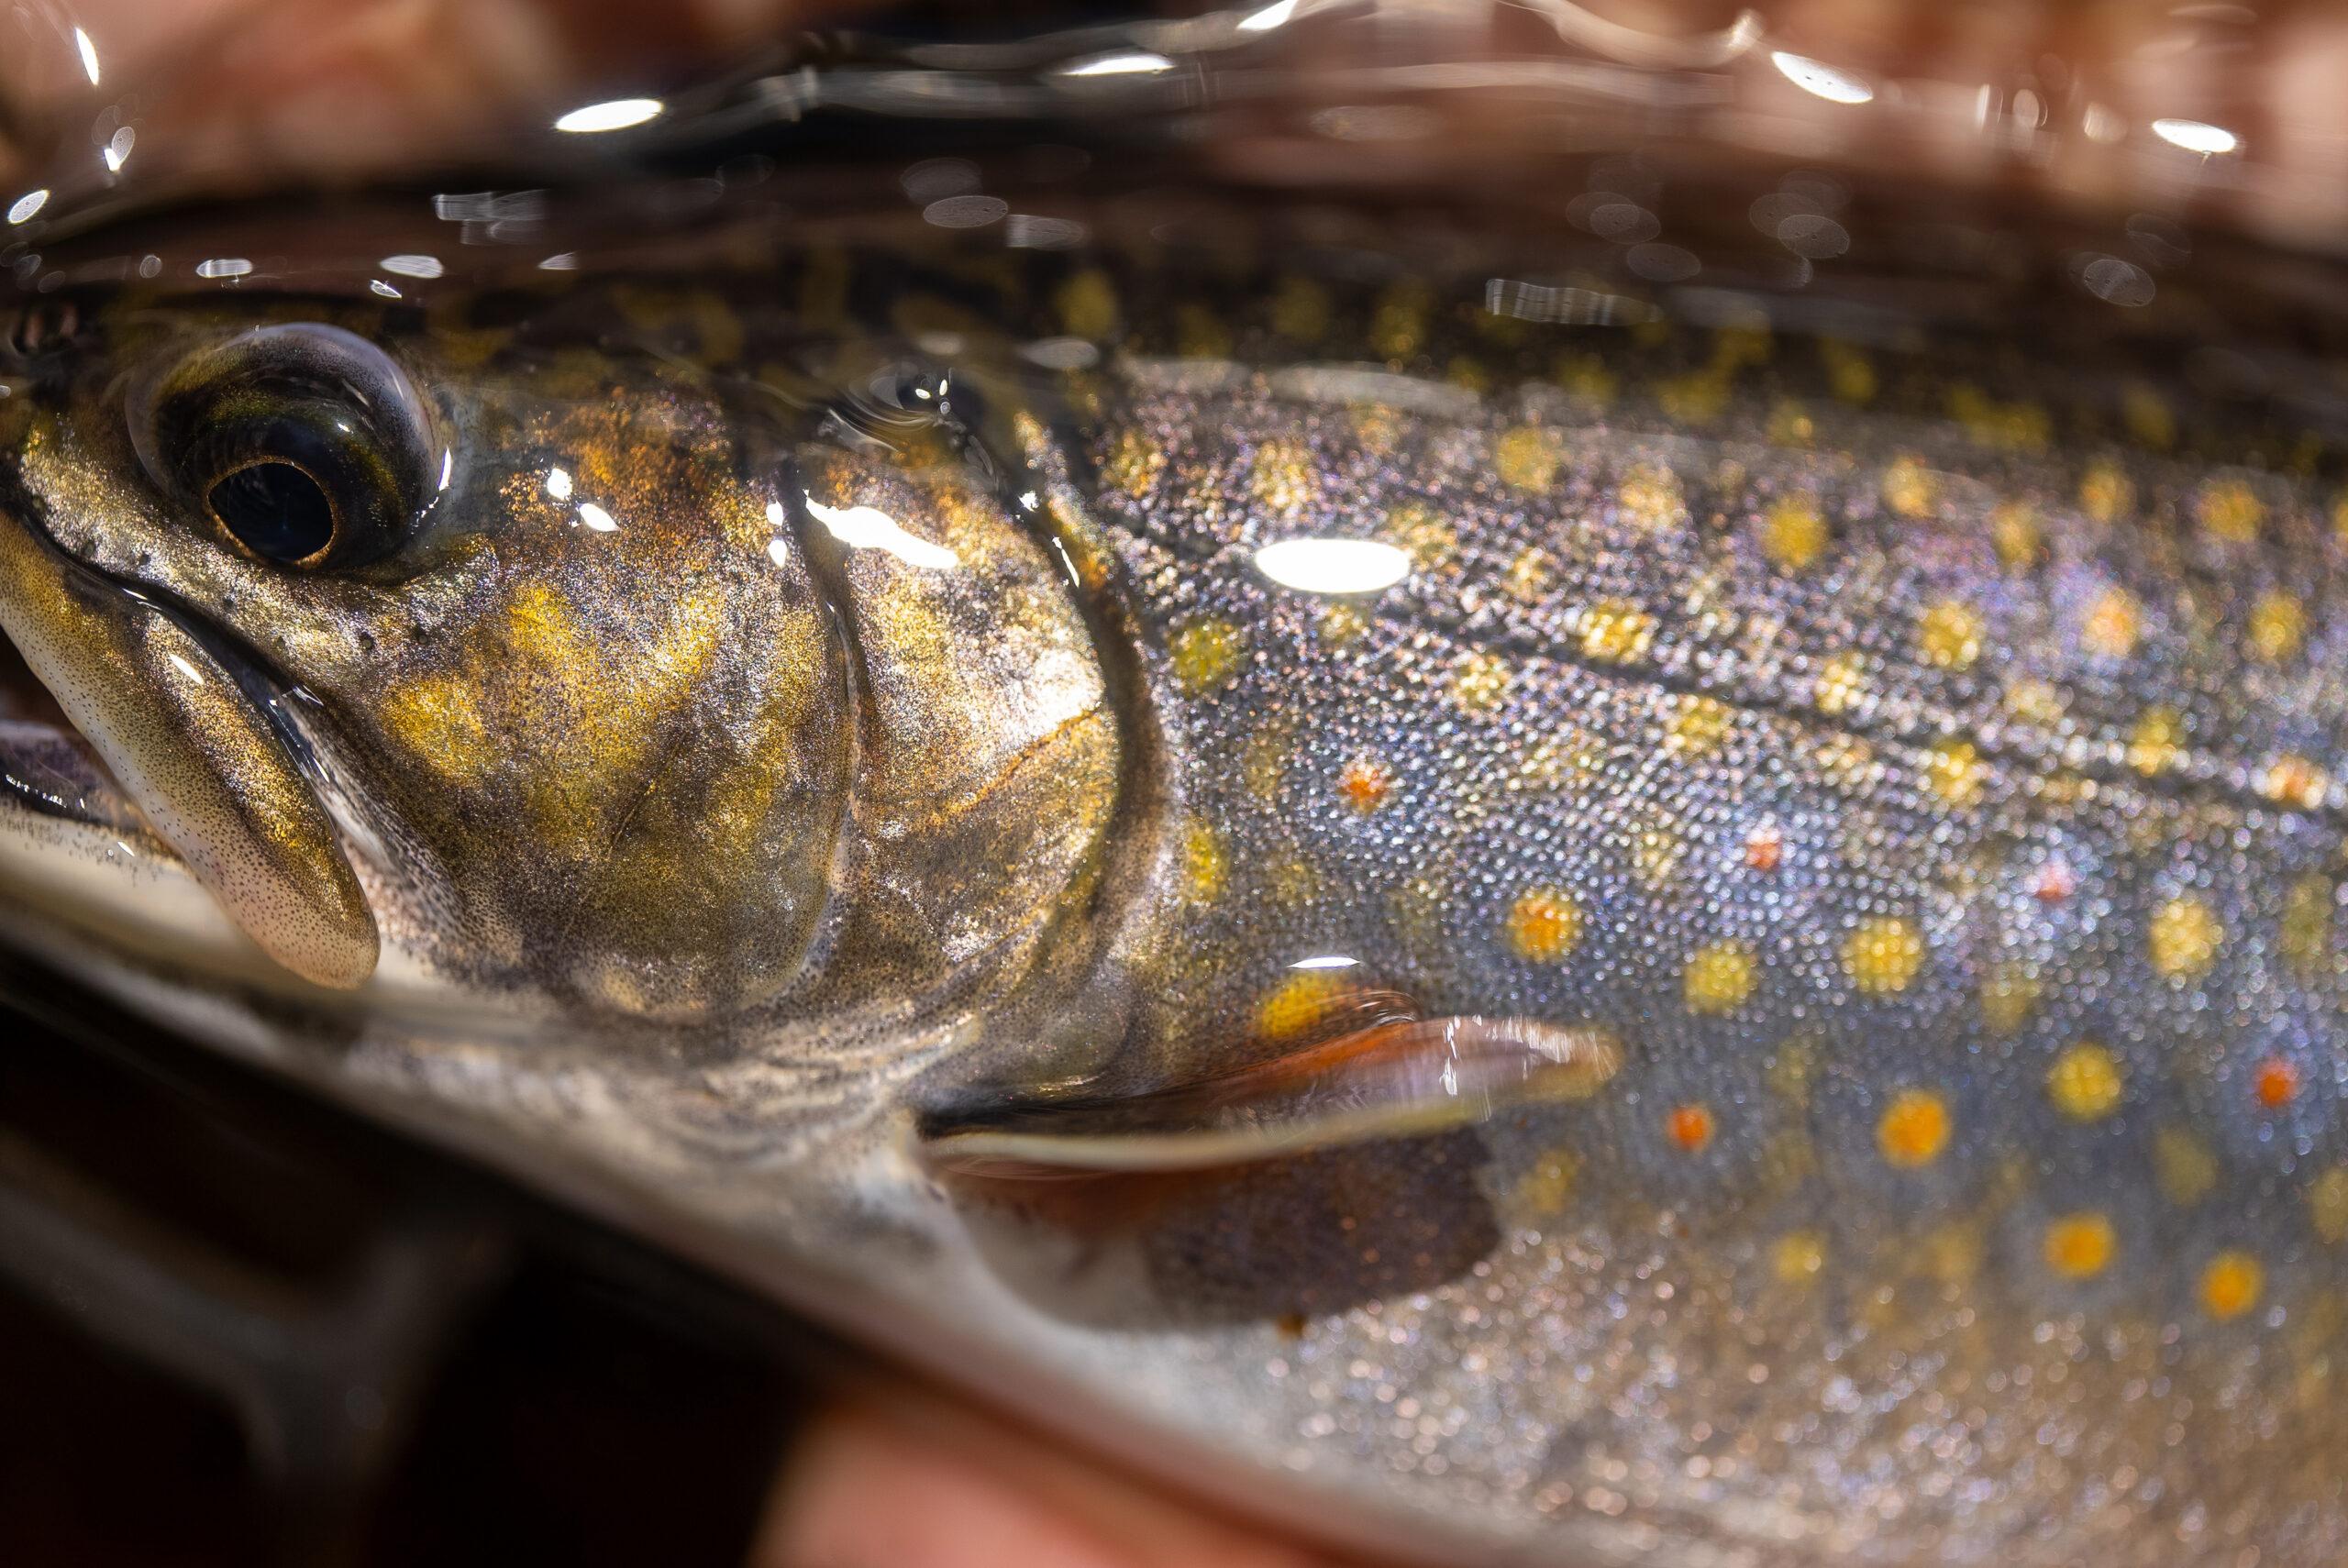 Mainebrooktrout